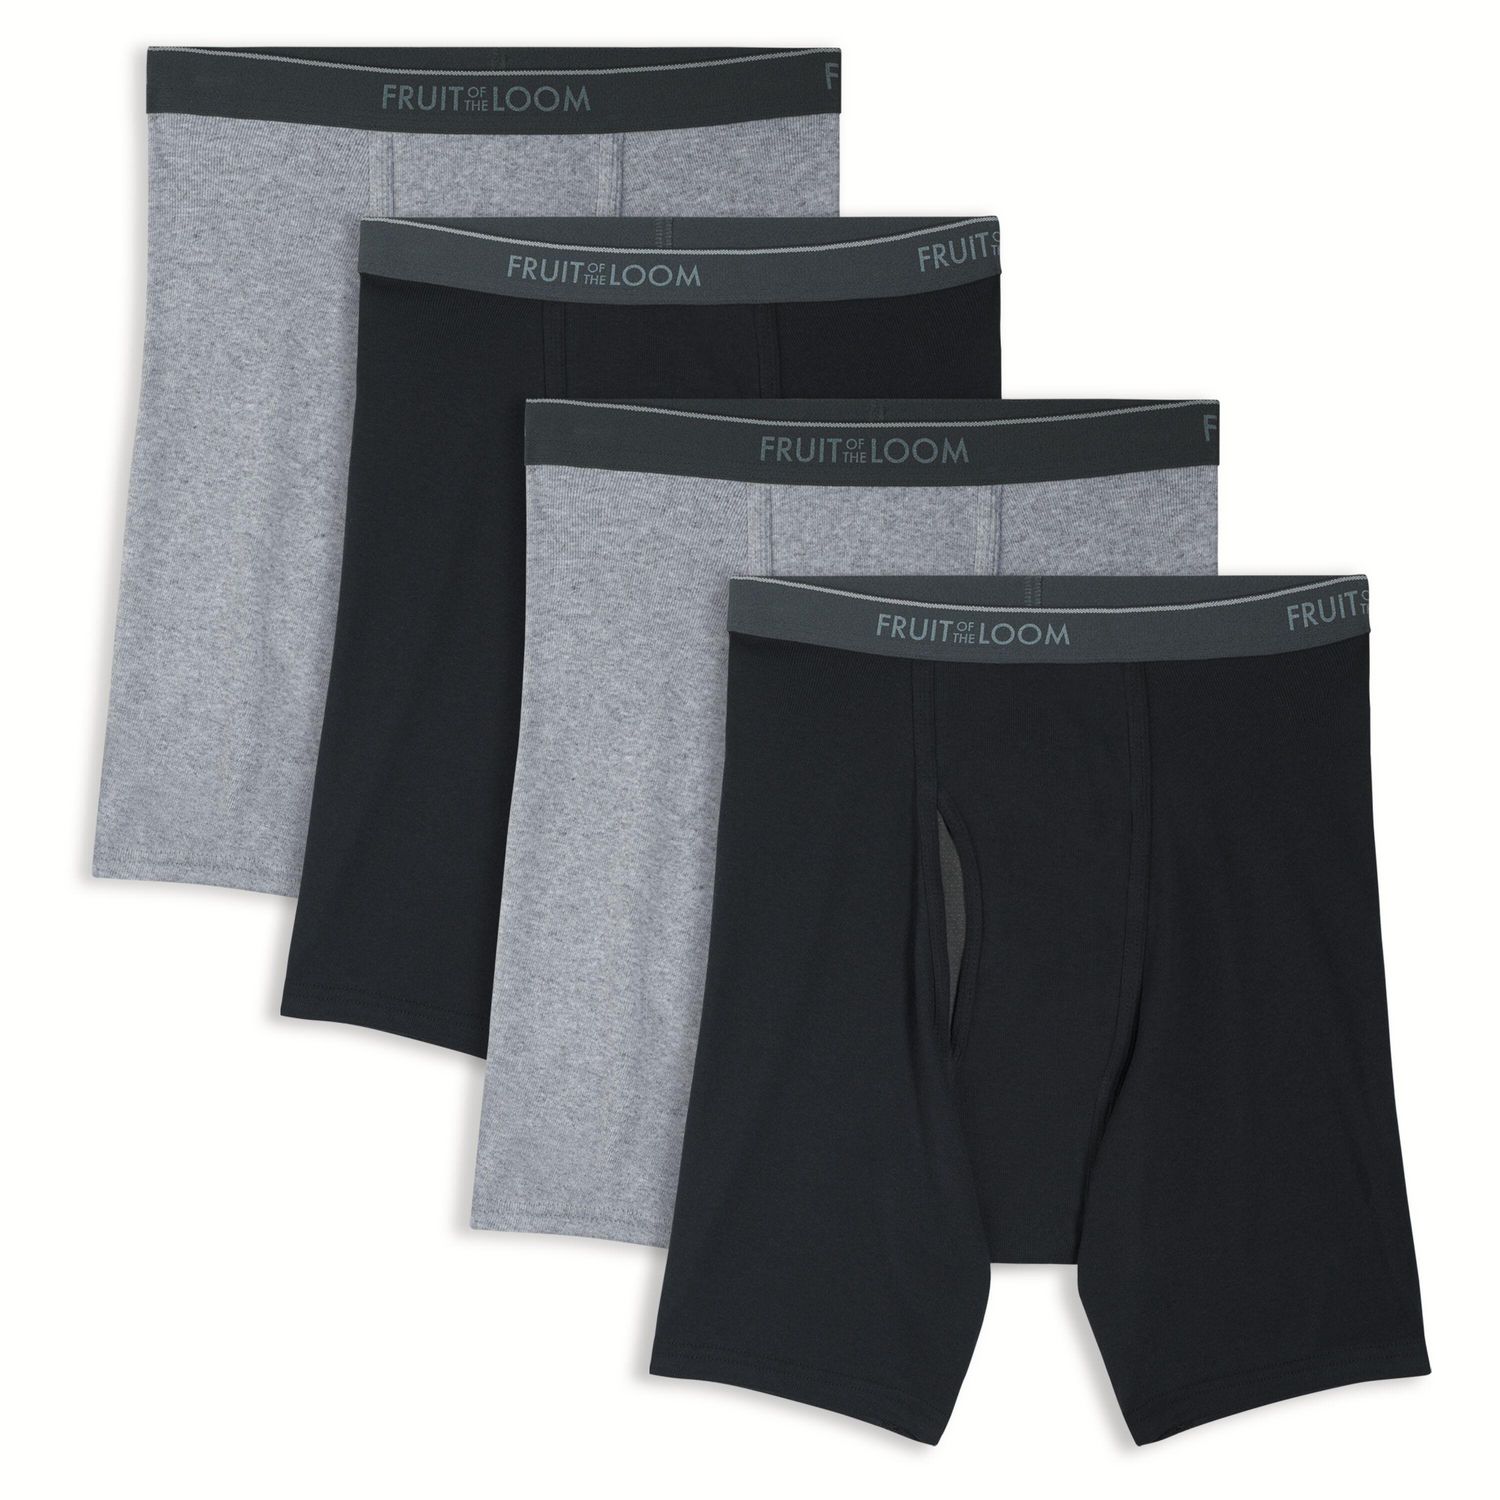 Fruit of the Loom Men's 3-Pack CoolBlend Boxer Briefs - Assorted Colors